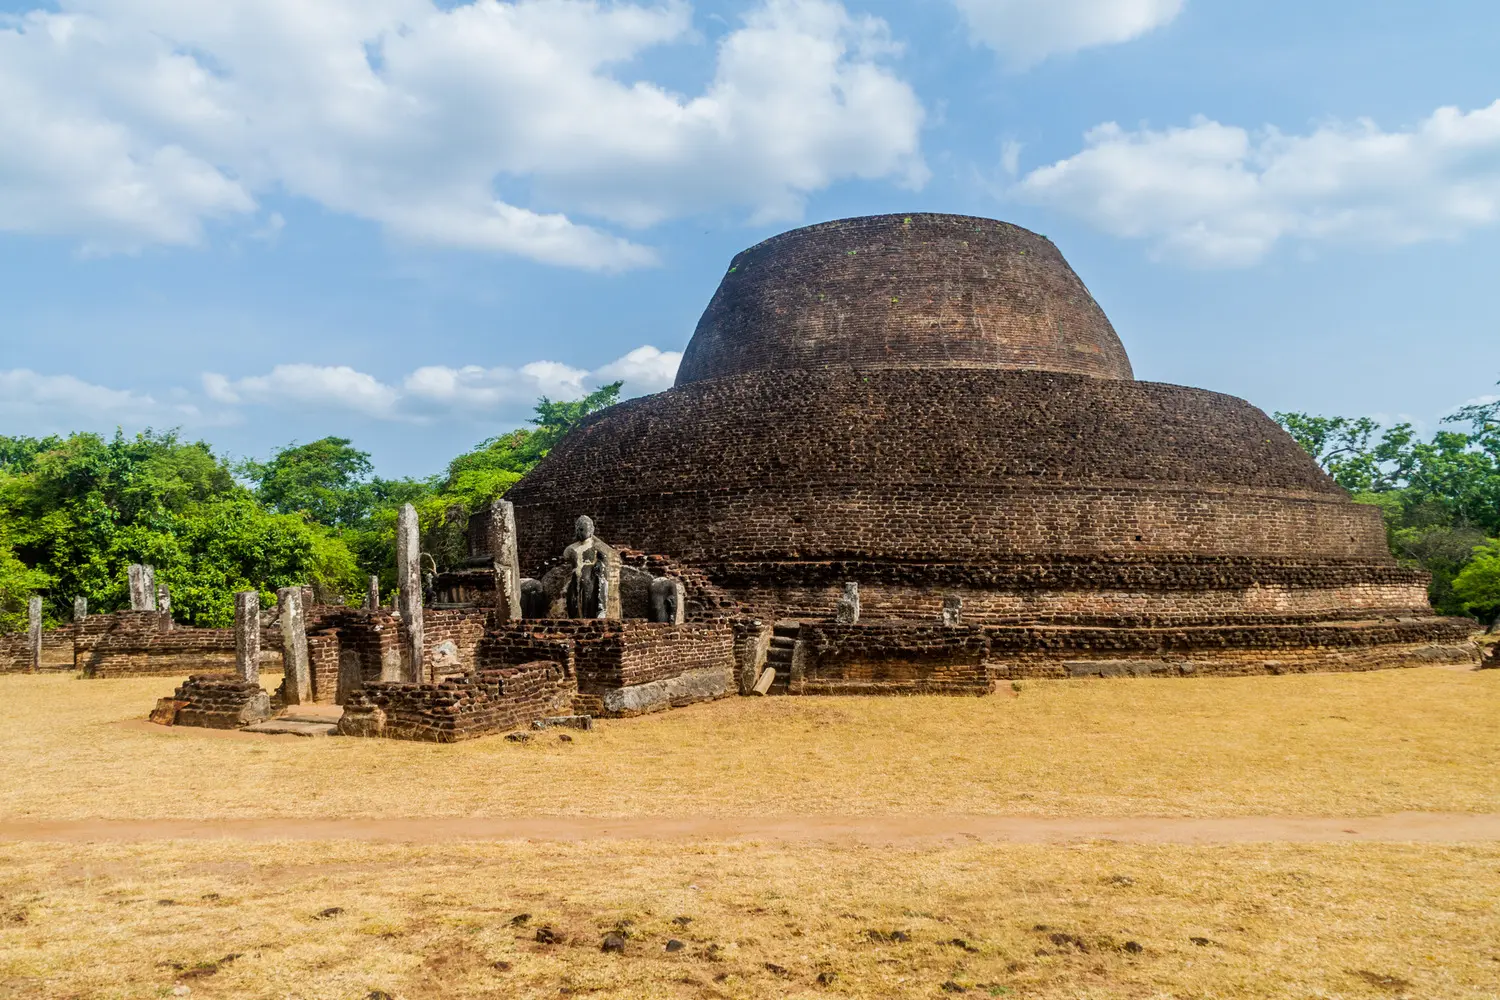 Large brick stupa ruin in two layers, with a Buddha statue and pillars at the entrance, in Polonnaruwa.